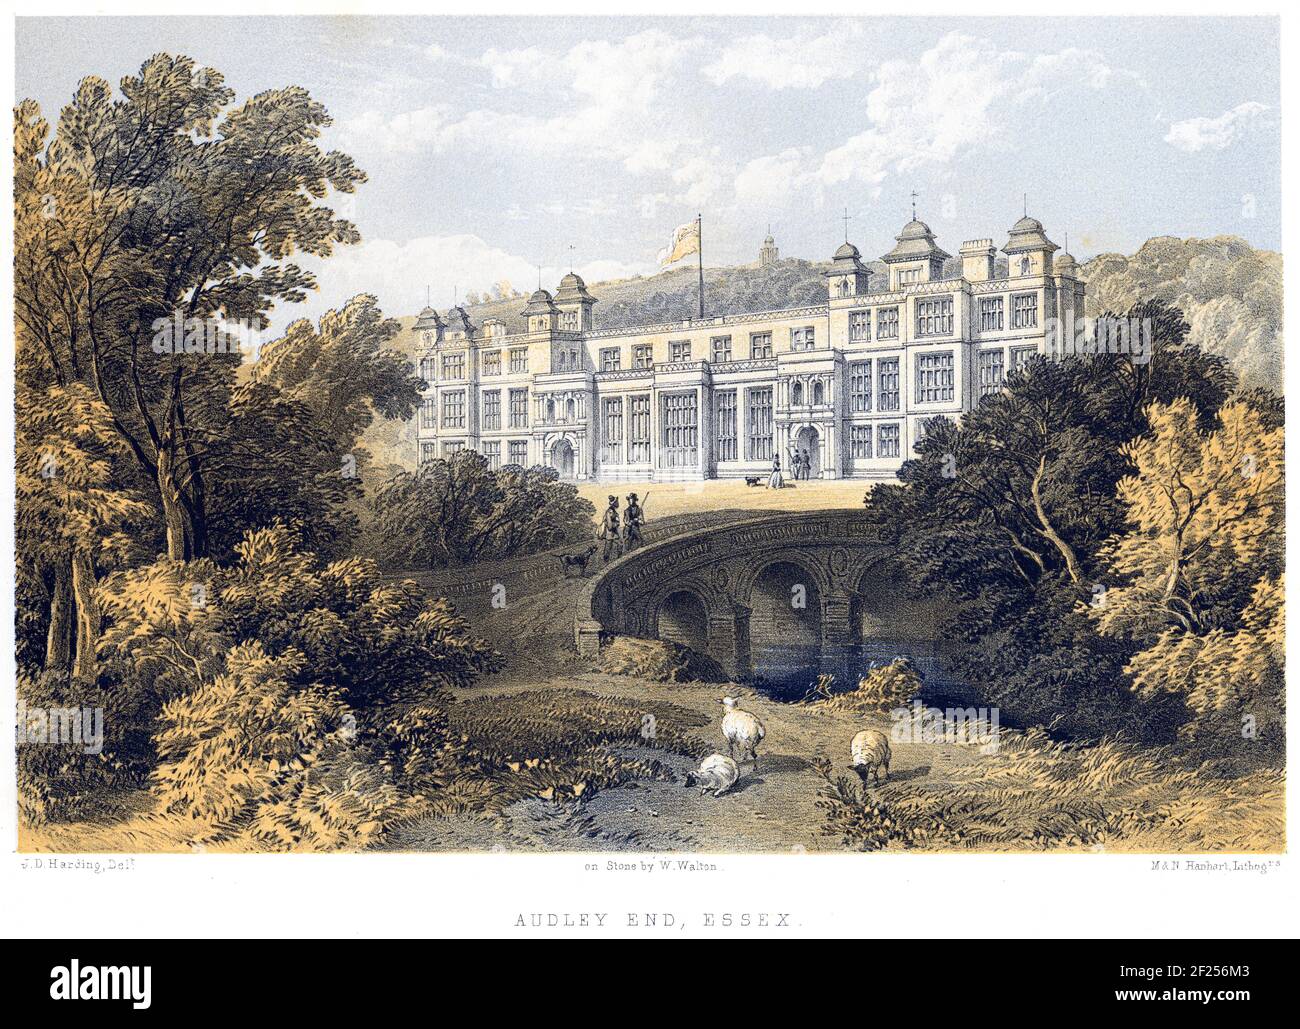 A lithotint of Audley End, Essex UK scanned at high resolution from a book printed in 1858. The artist J D Harding died in 1863. Stock Photo